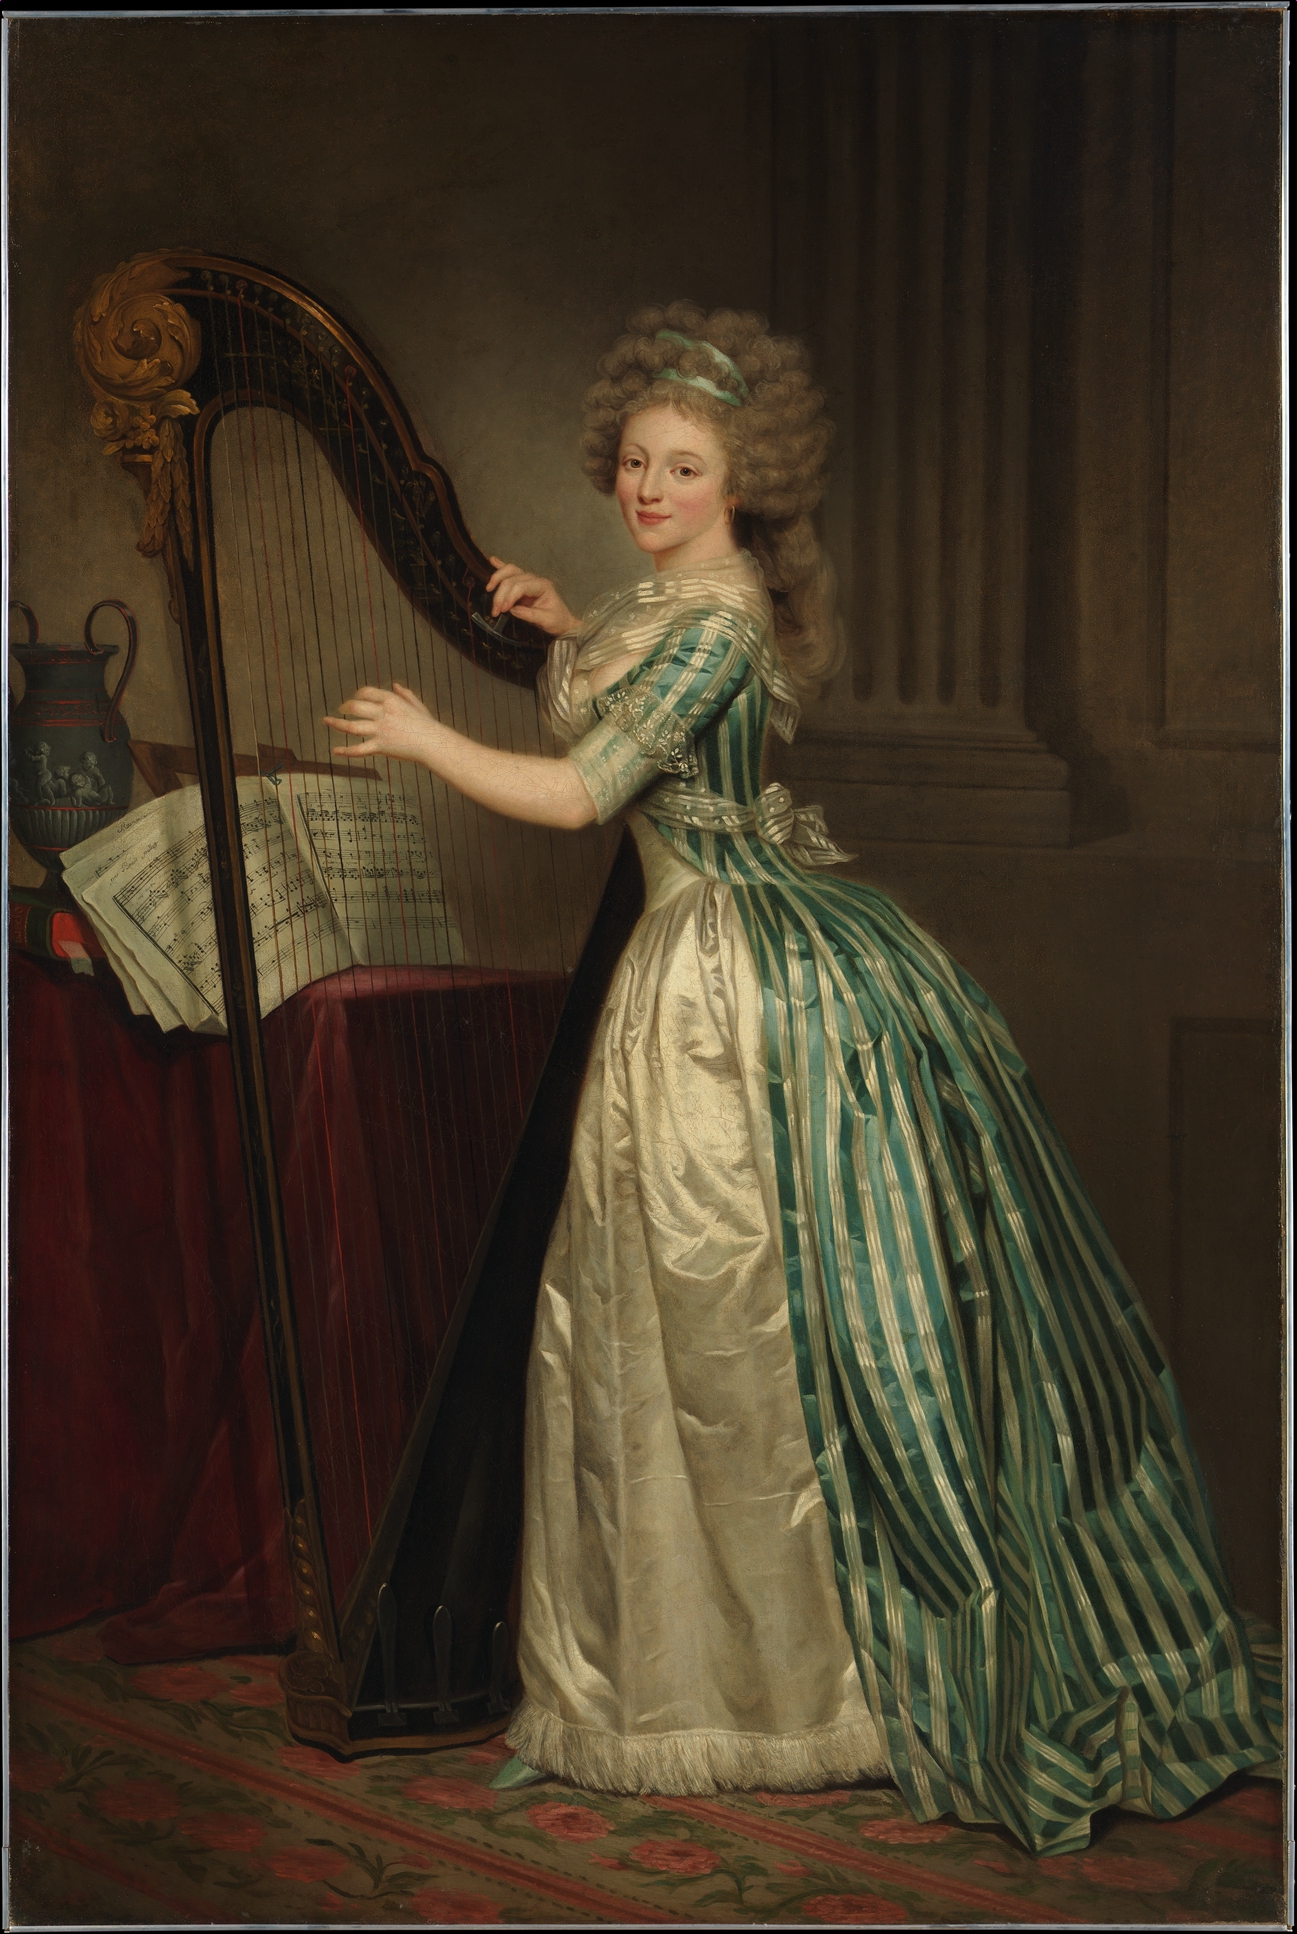 A full-length portrait of a young woman standing at a harp, with the fingers of her left hand resting on the strings and her right hand resting on the frame. She is wearing an elaborate eighteenth-century gown and a gray wig. Behind the harp there is sheet music and a Greek vase arranged on a table draped in red cloth.